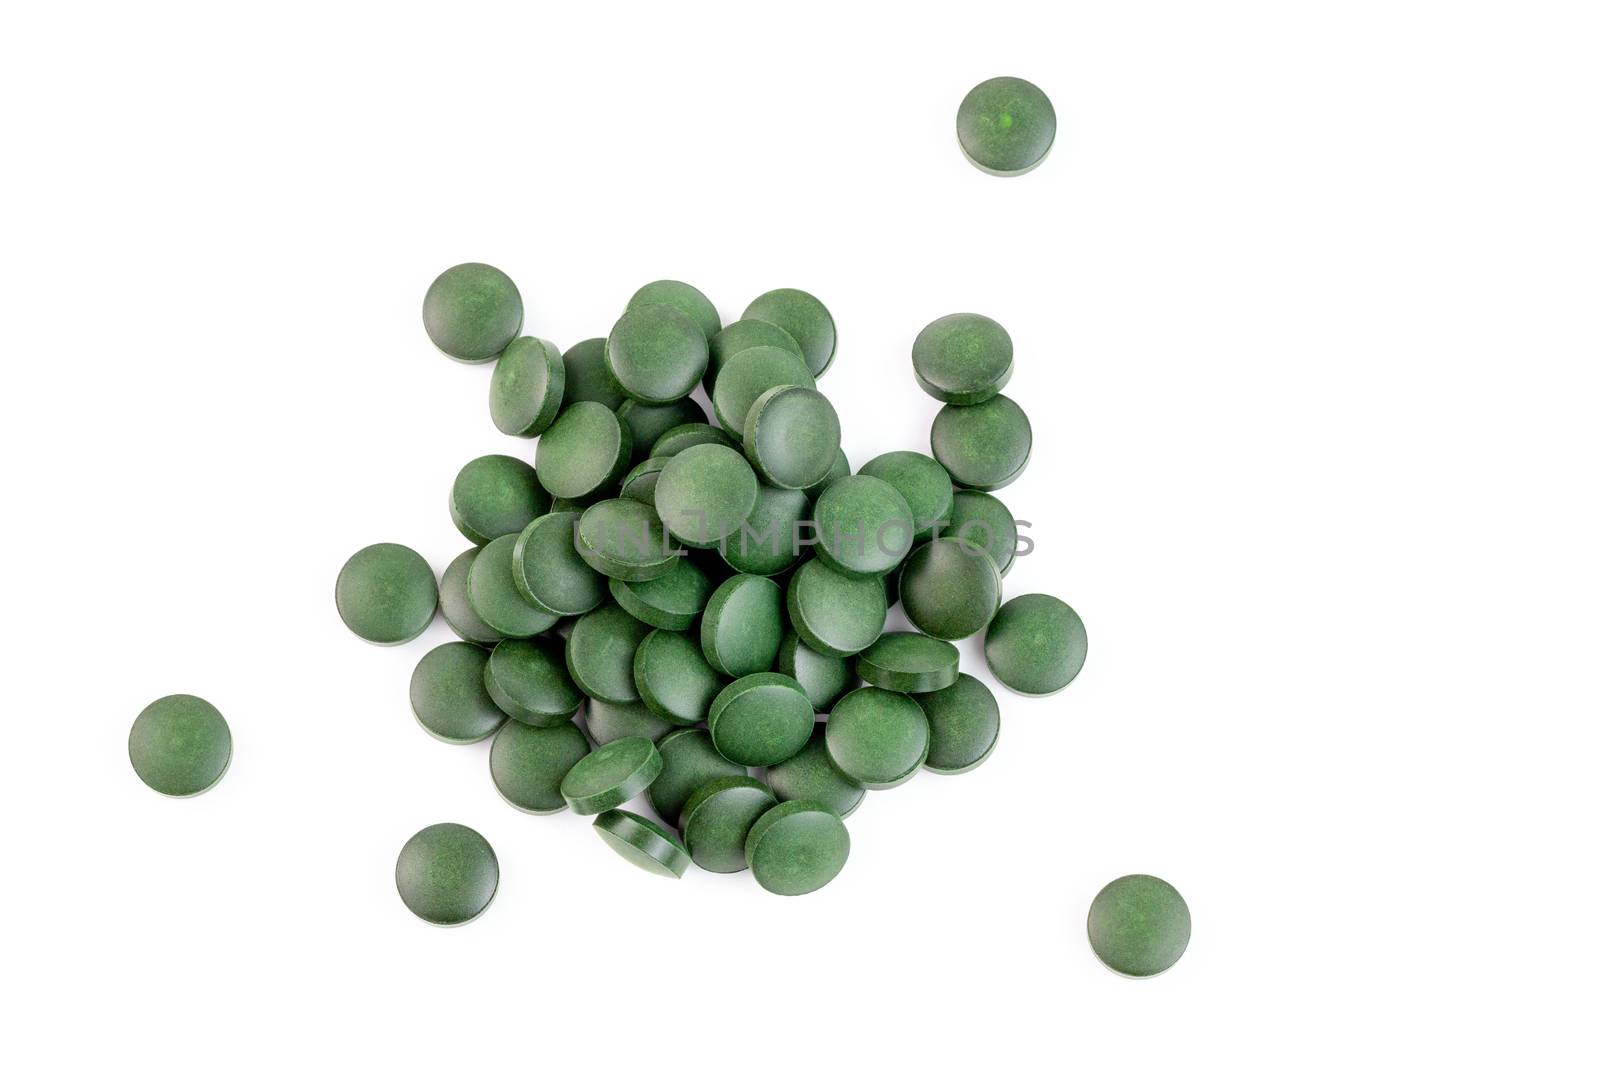 a small pile of green spirulina pills isolated on white background in linear perspective by z1b